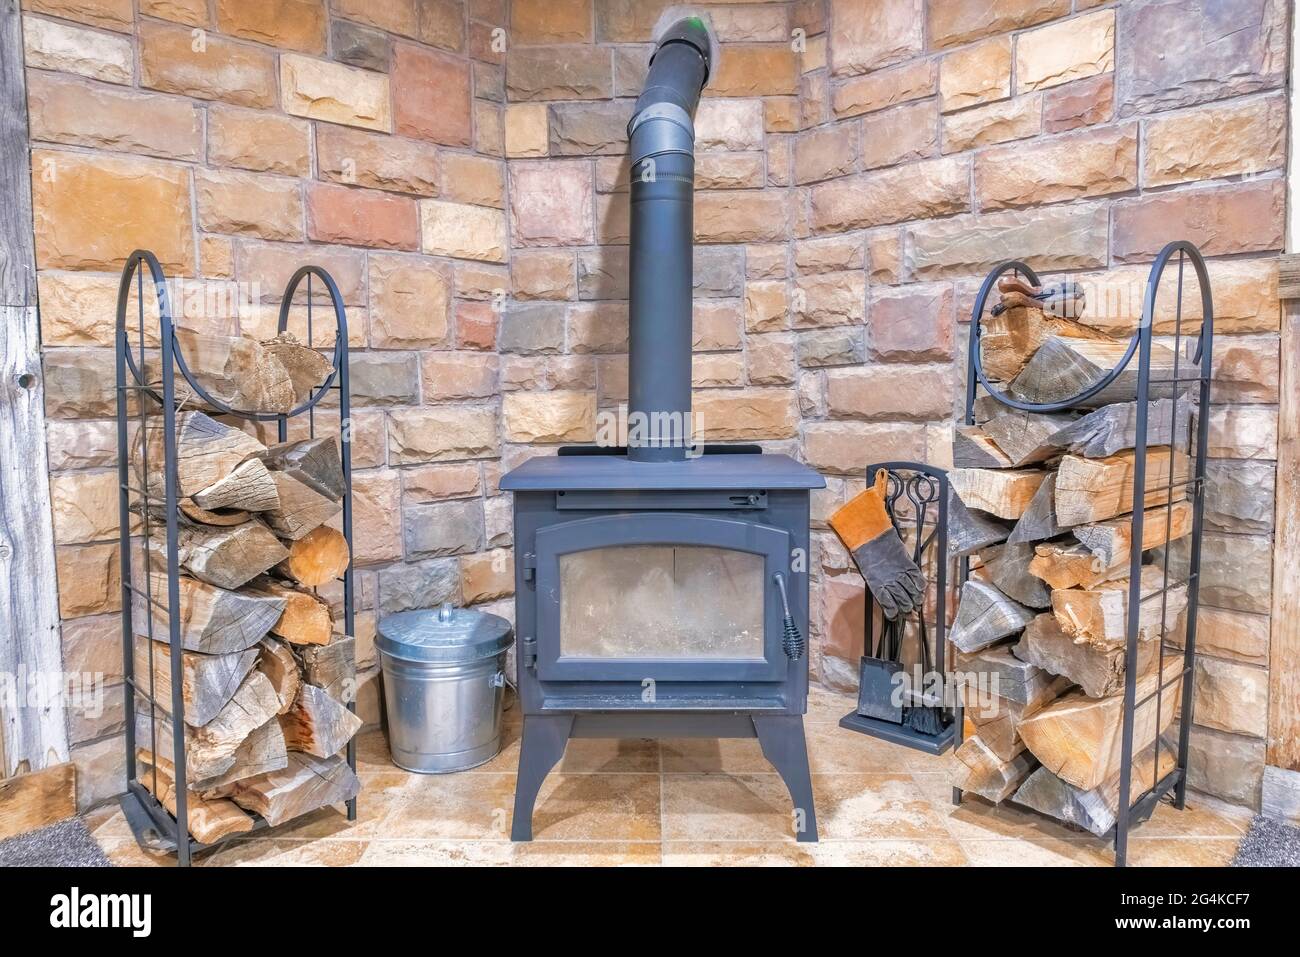 Vintage fireplace with chopped wood and brick walls Stock Photo